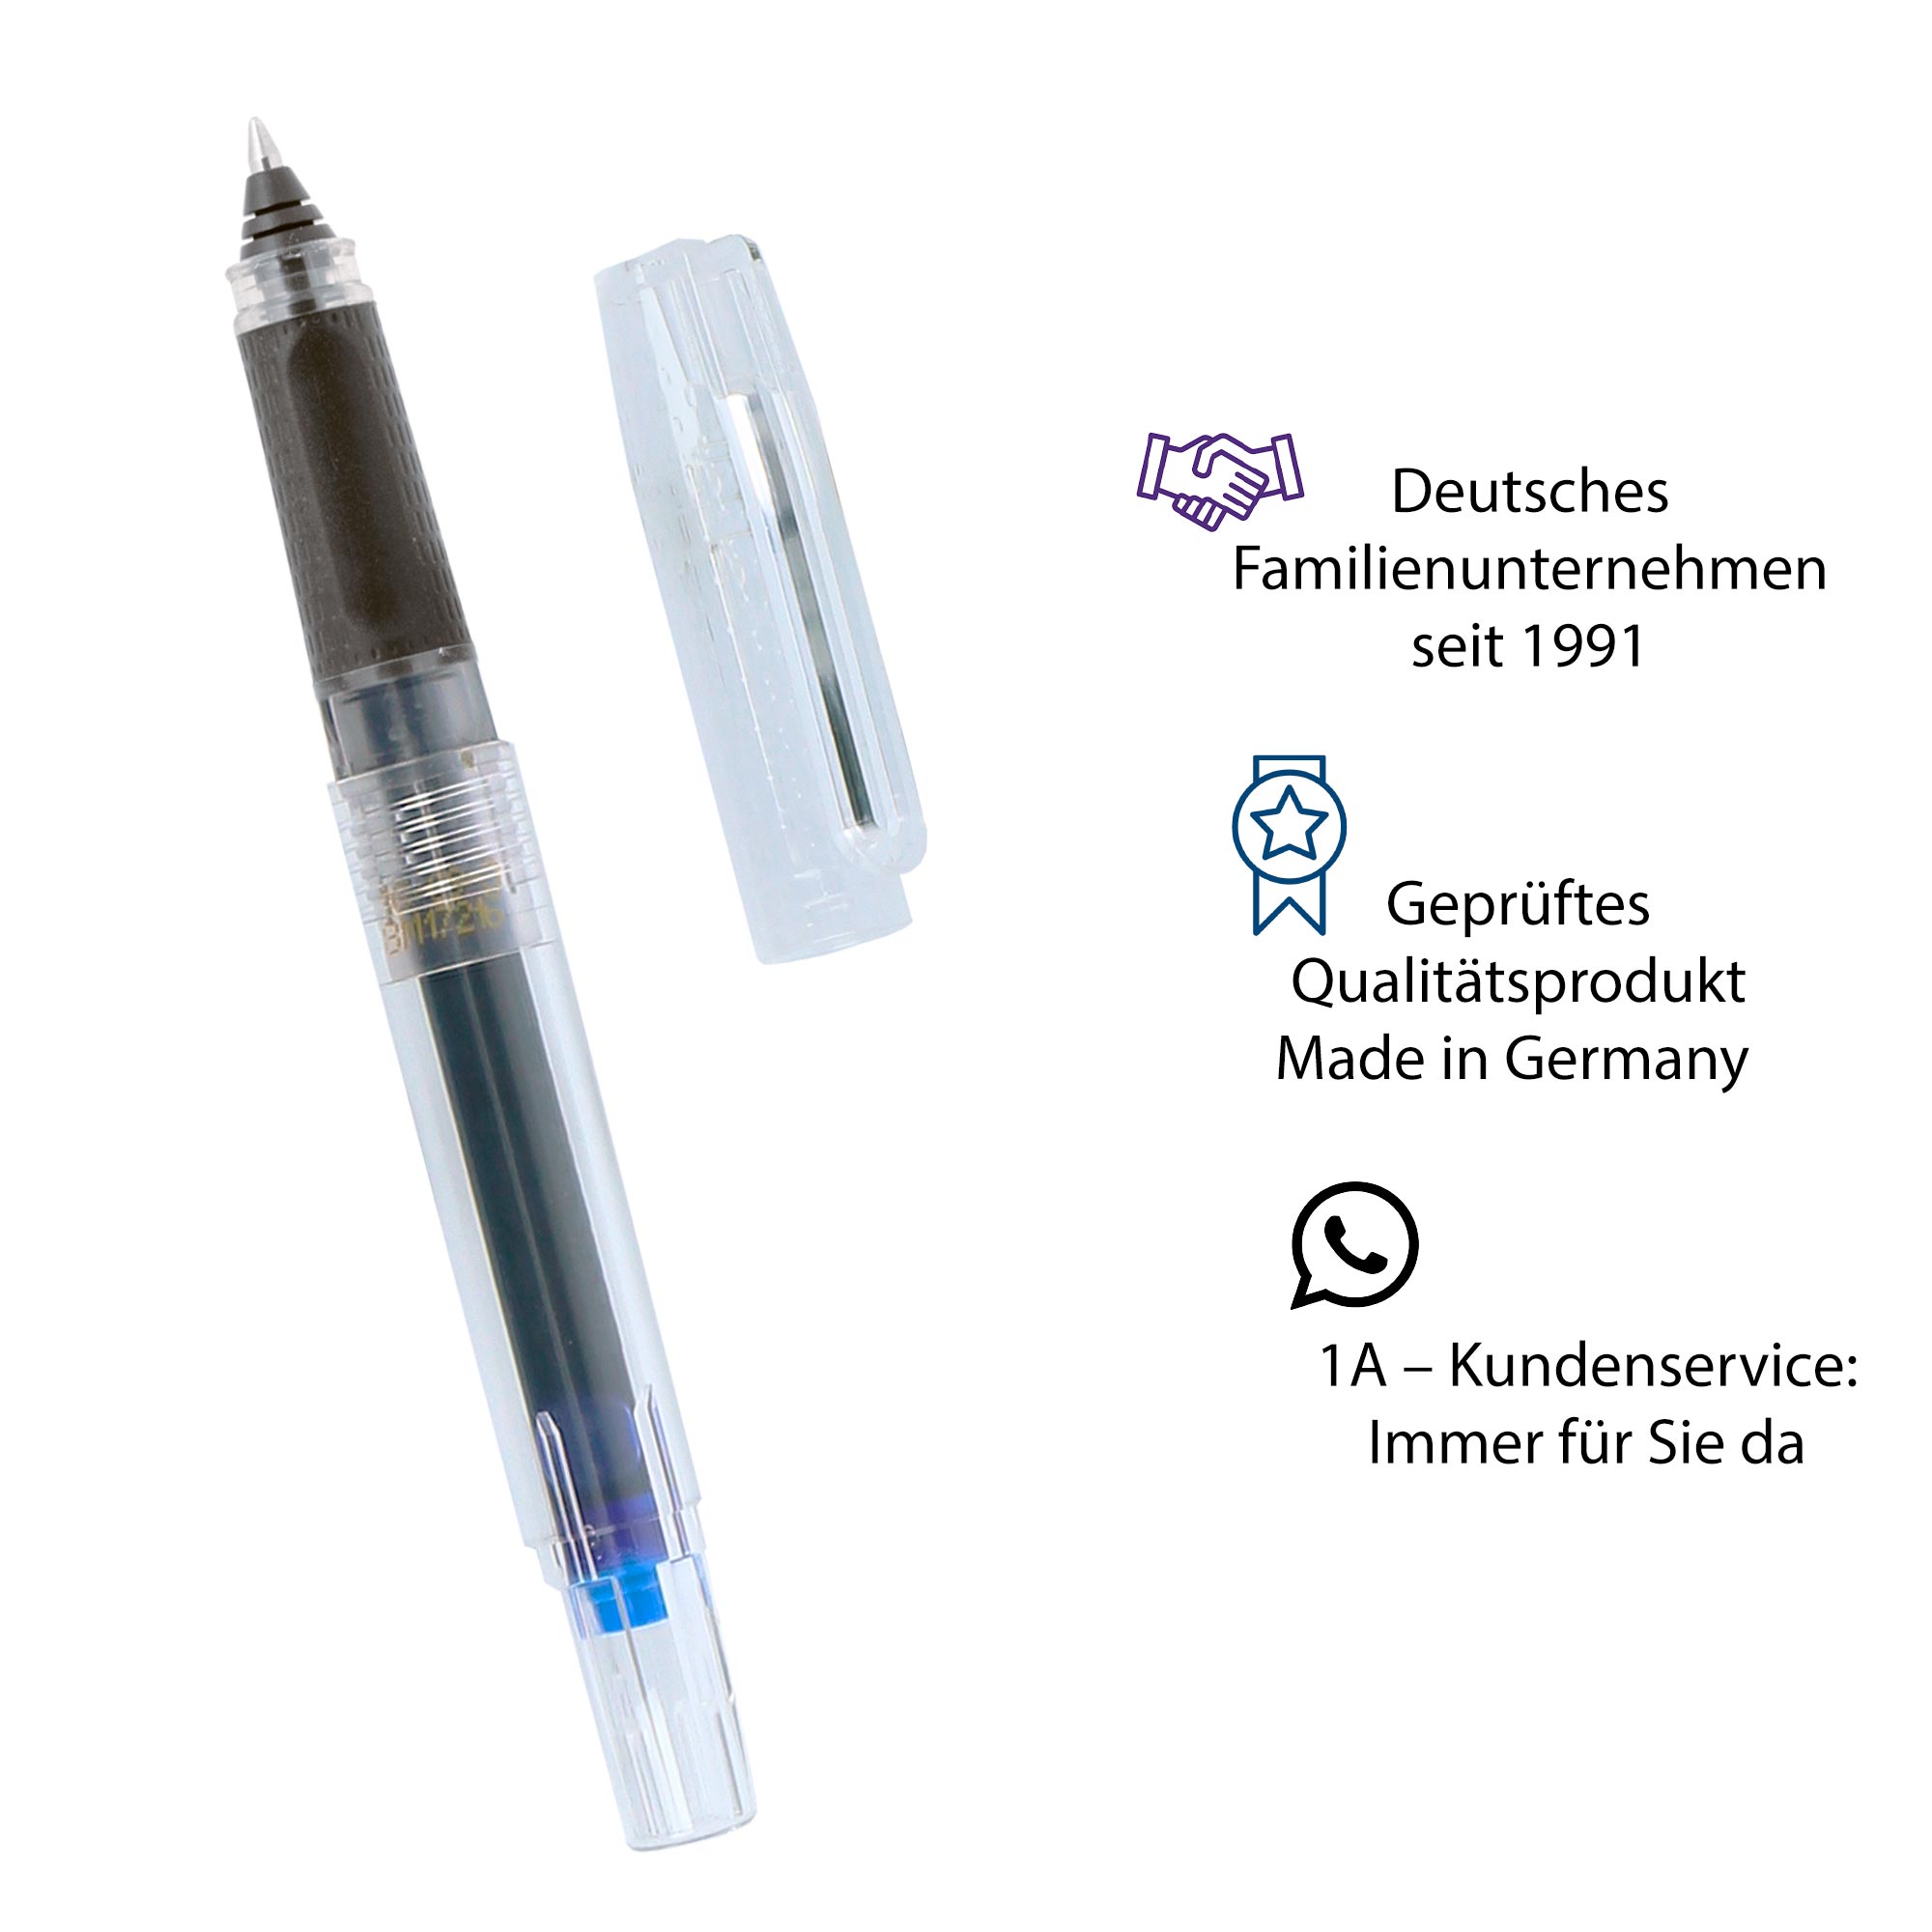 Ink Rollerball Bachelor Ice